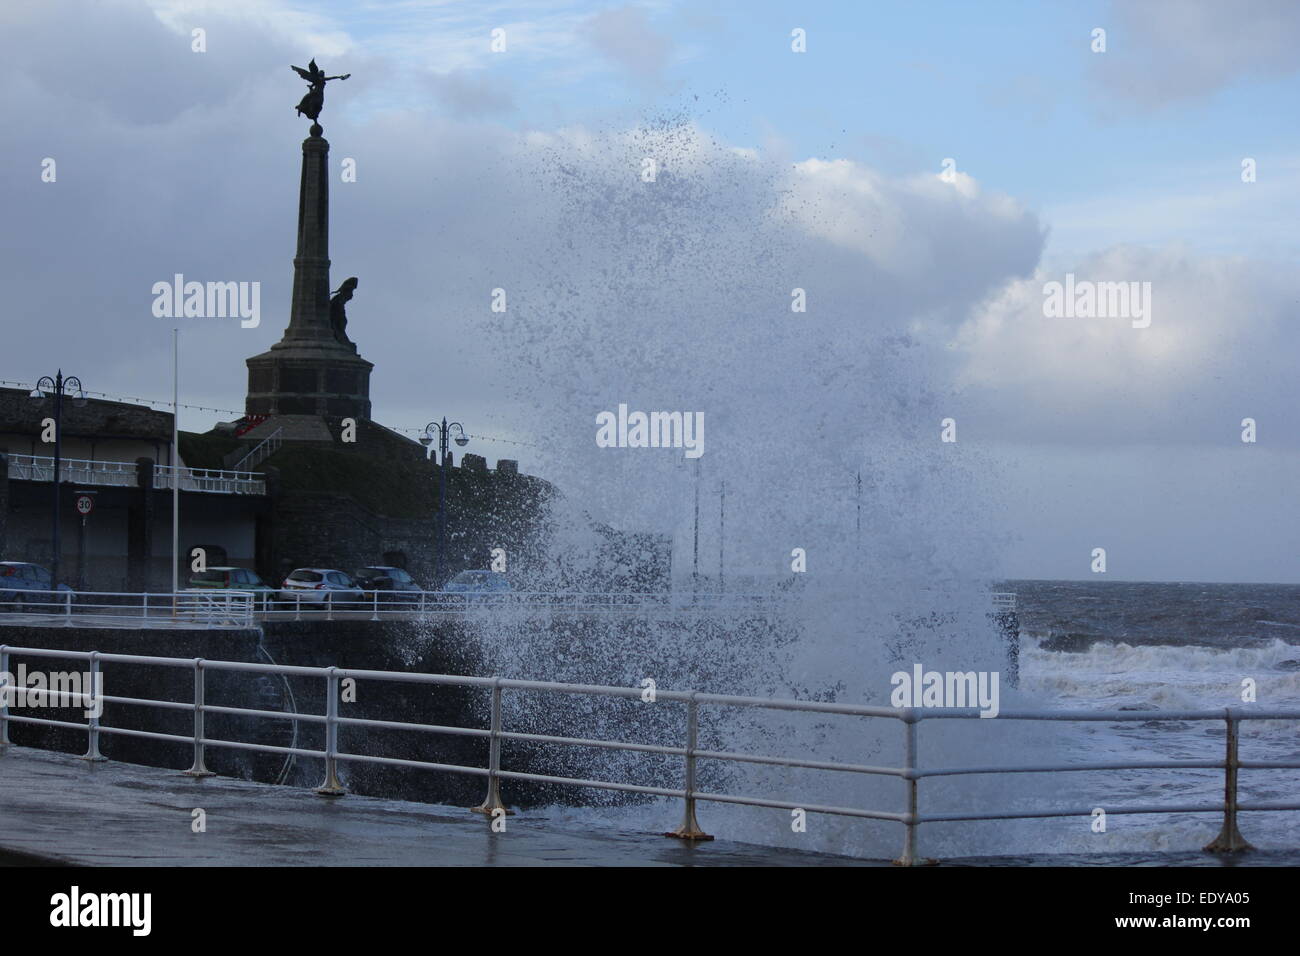 Aberystwyth west Wales UK.. Gale force winds & angry seas batter the coastline. Stock Photo